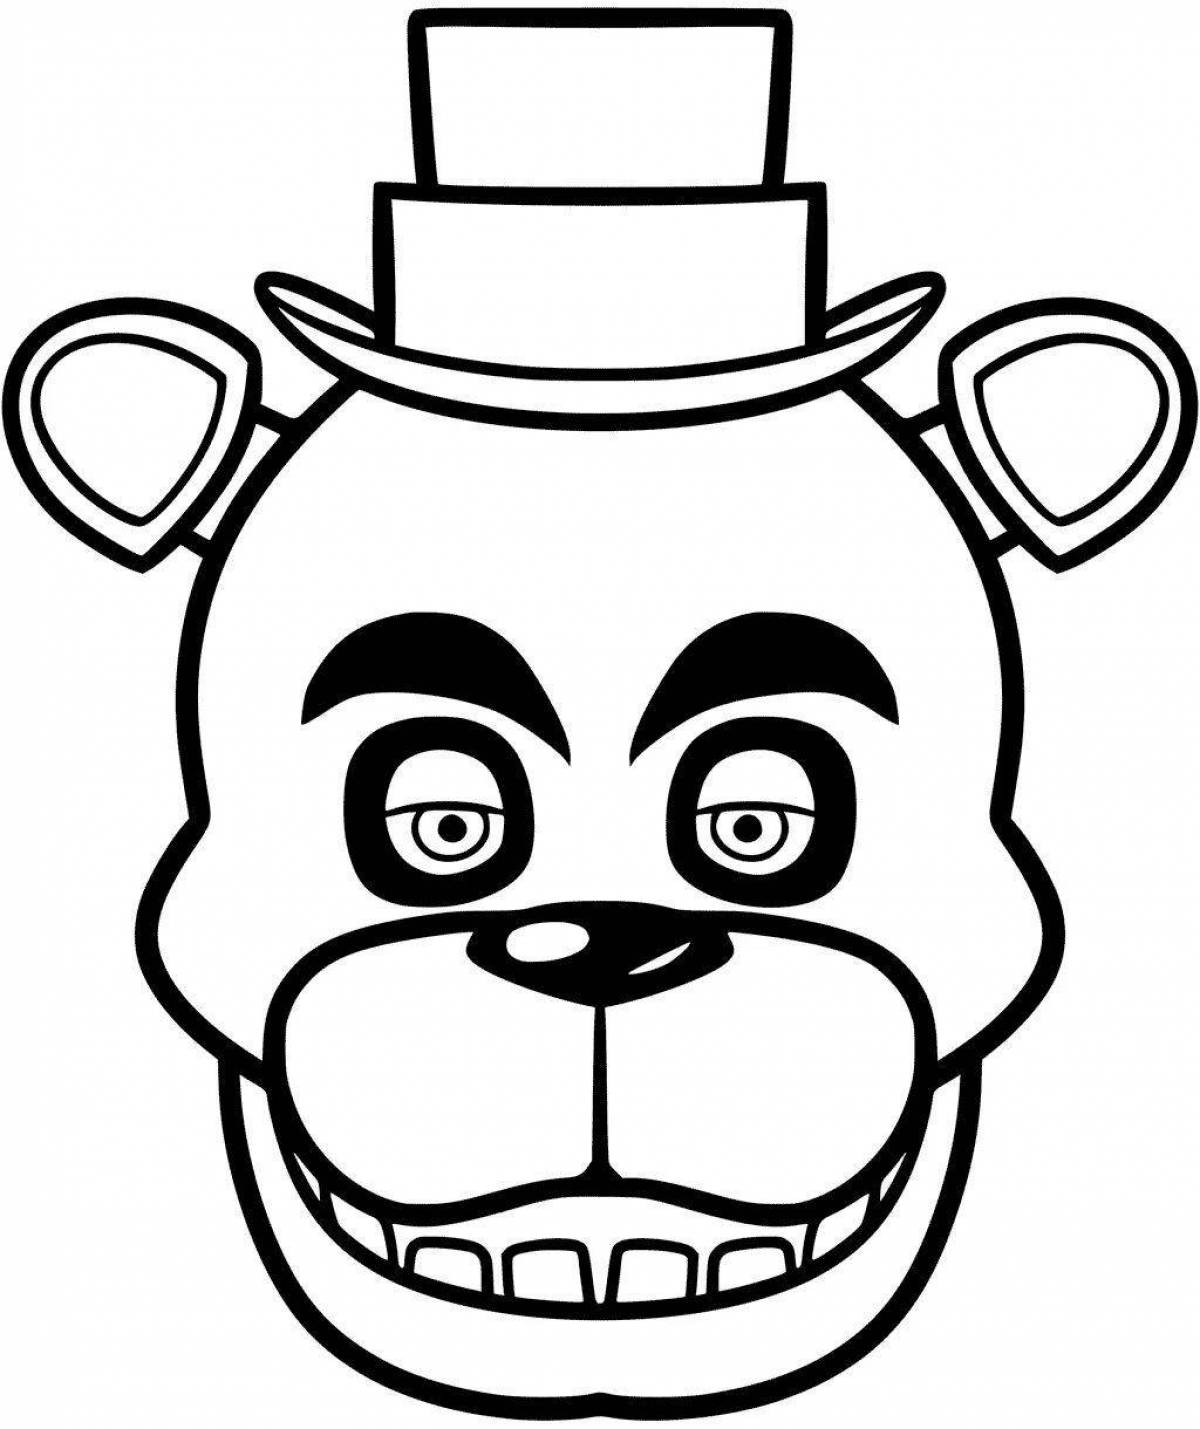 Playful bonnie mask coloring page